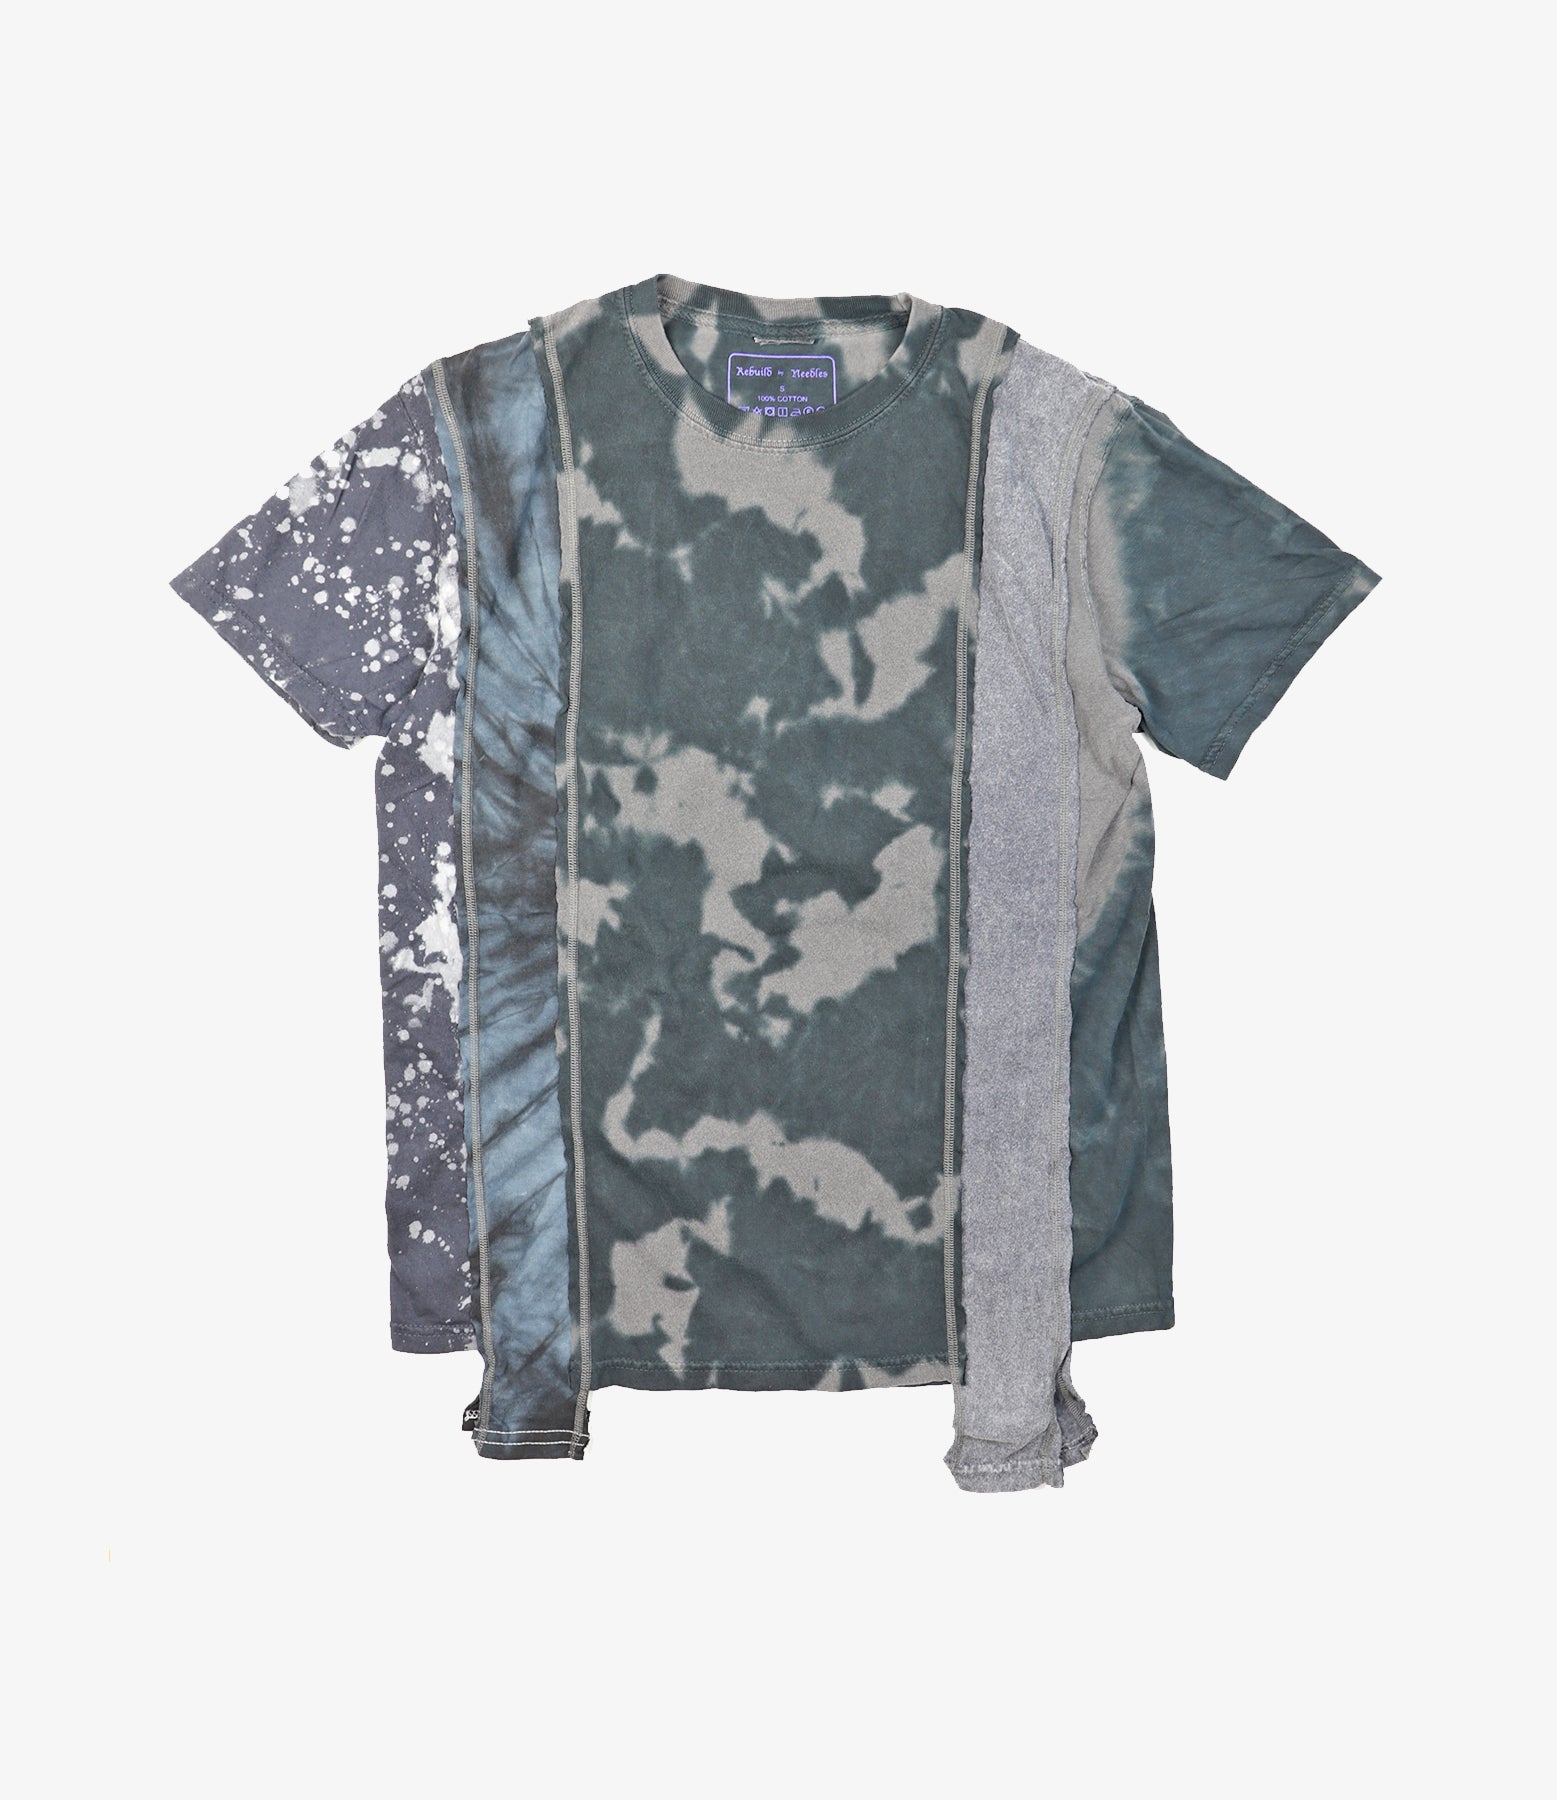 Rebuild by Needles 5 Cuts S/S Tee -B&W Mishmash Assorted – Rebuild by Needles – Nepenthes London